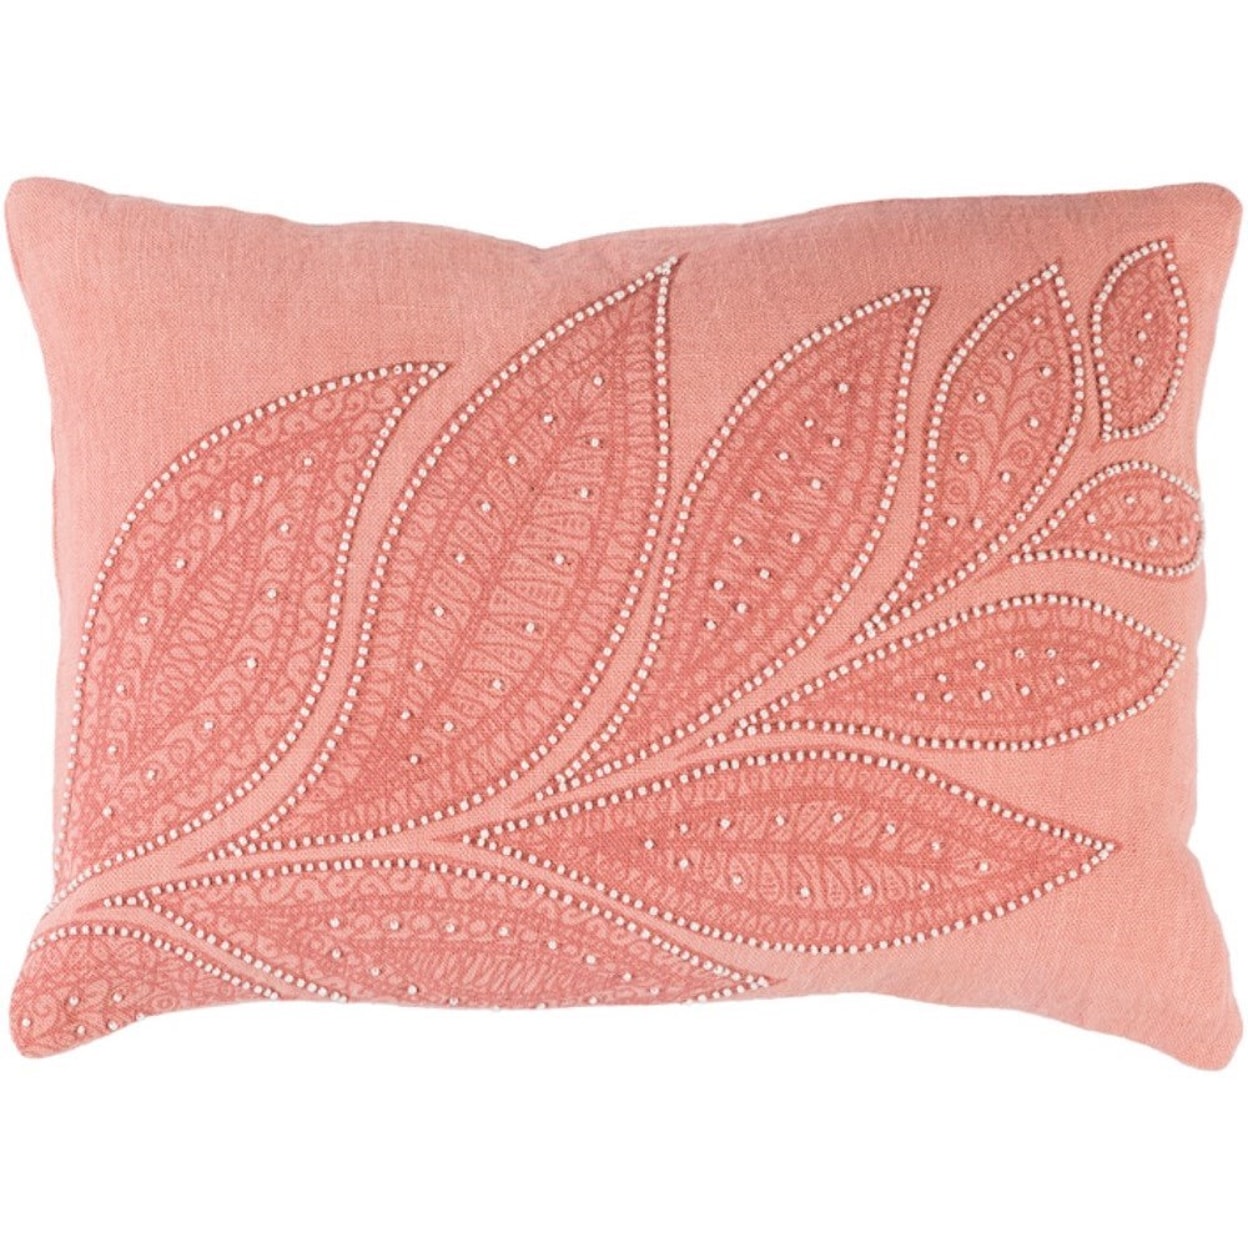 Ruby-Gordon Accents Tansy Pillow